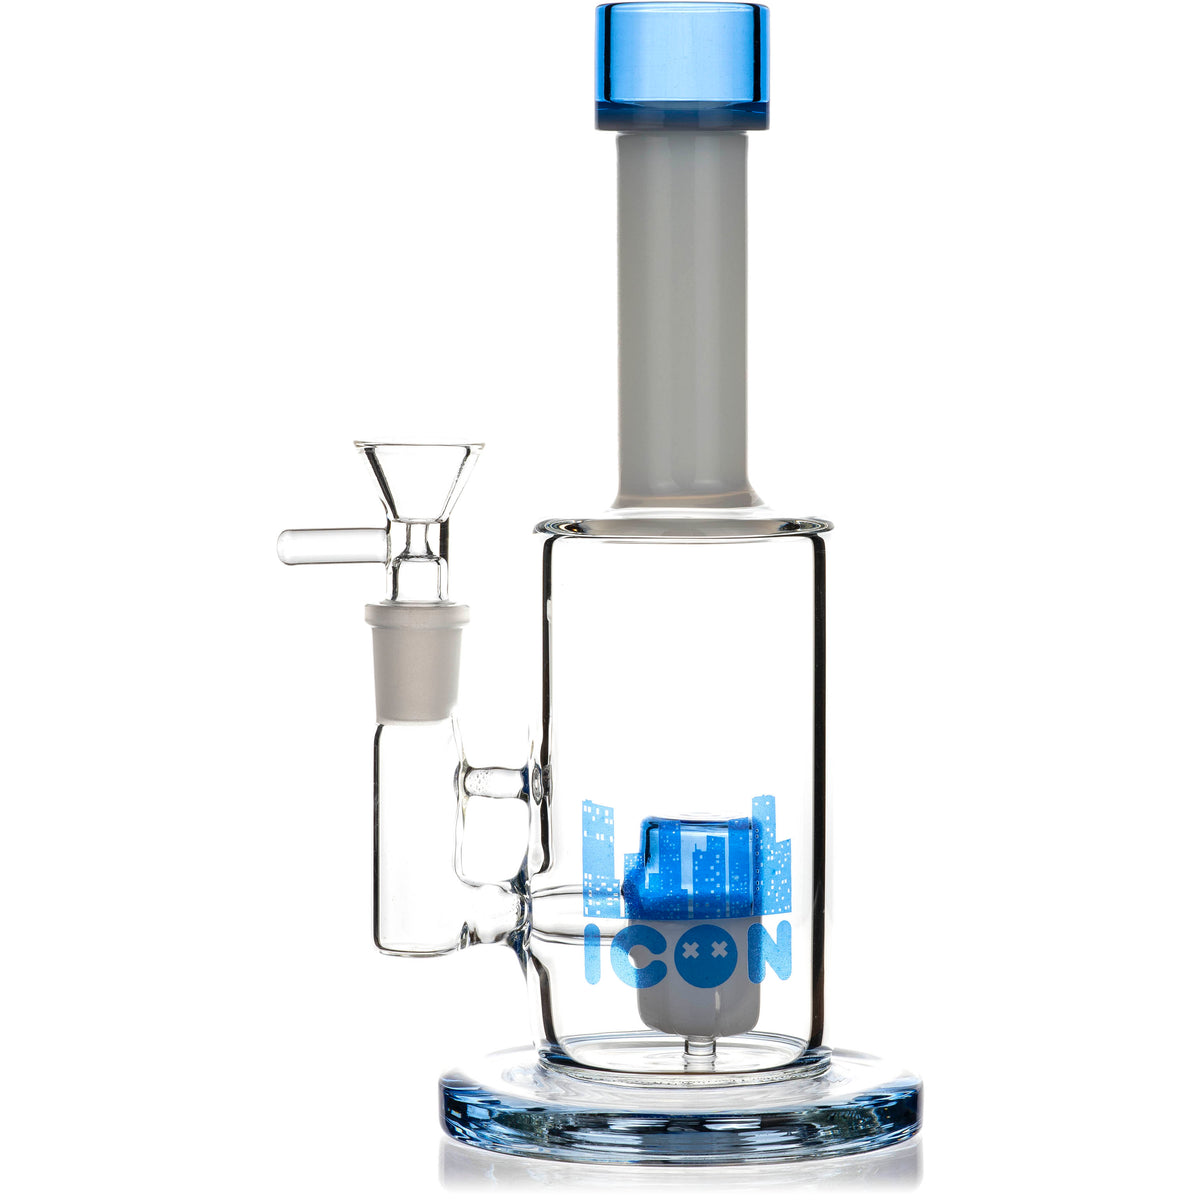 ICON Pill Rig, by ICON Glass (free banger included) - BKRY Inc.